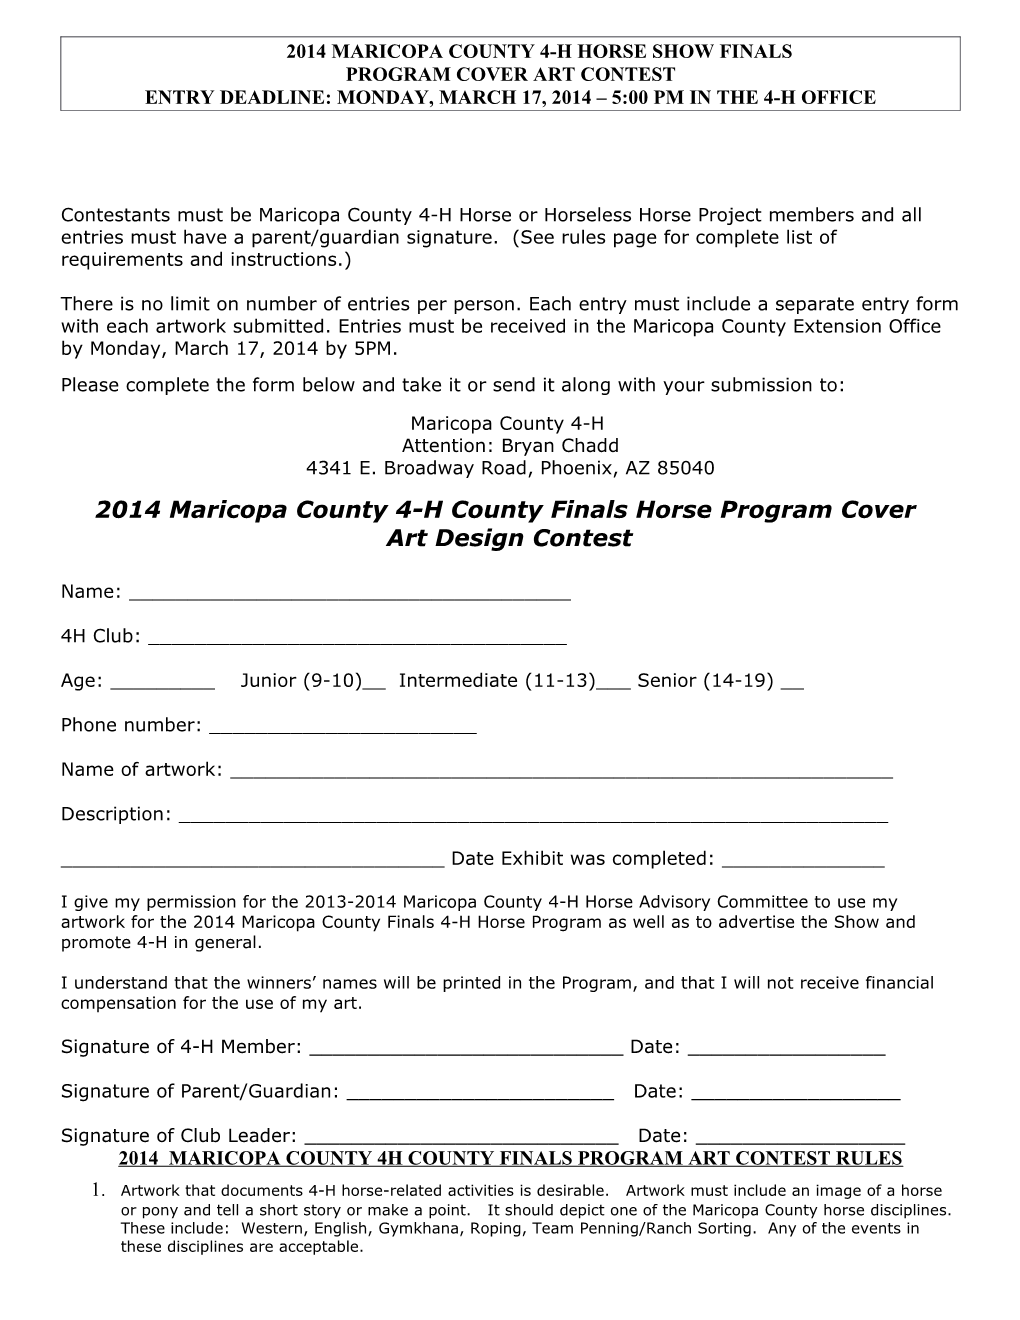 2014 Maricopa County 4-H Horse Show Finals Entry Form